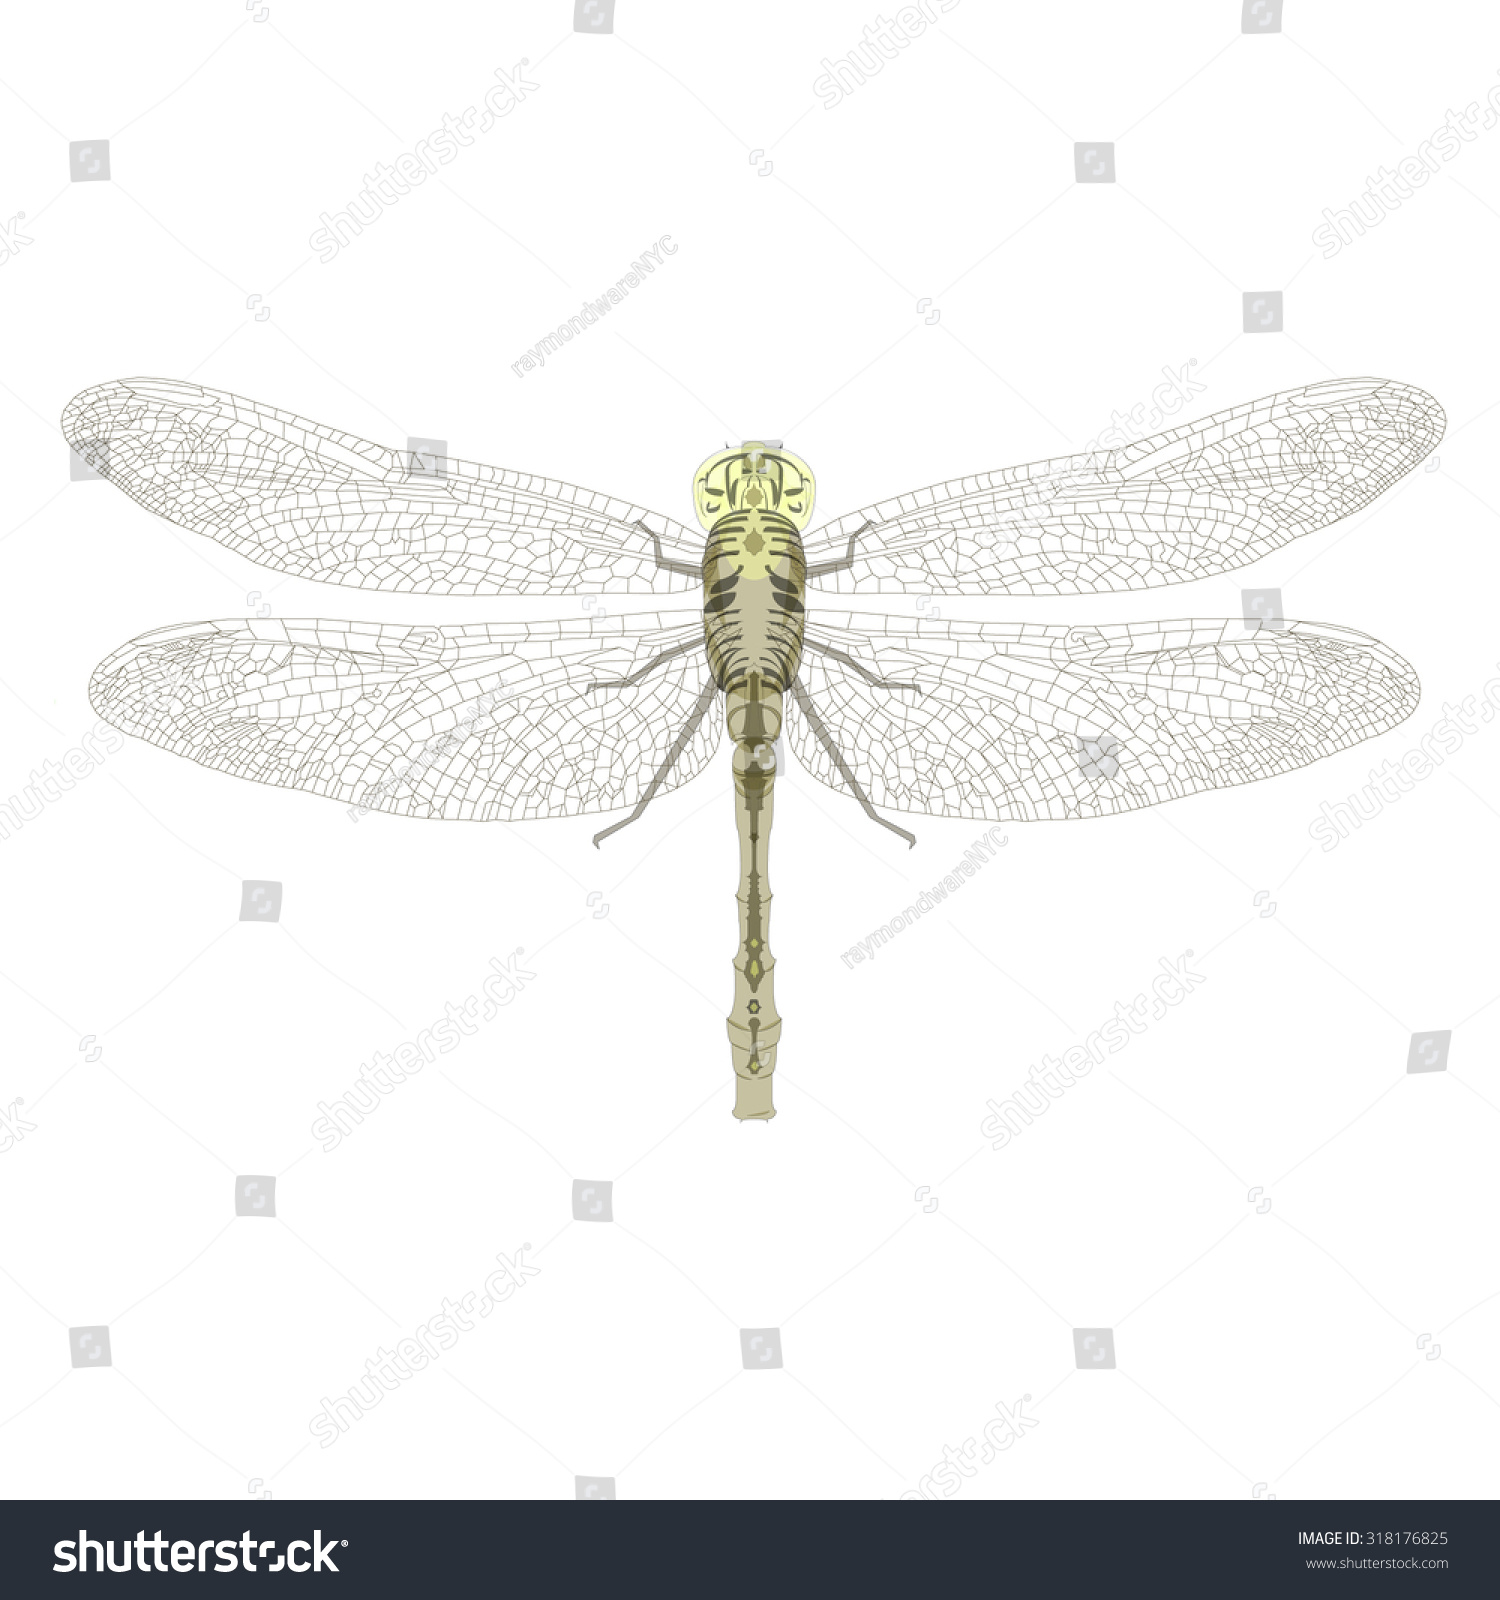 Intricate Vector Illustration Single Dragonfly Stock Vector ...